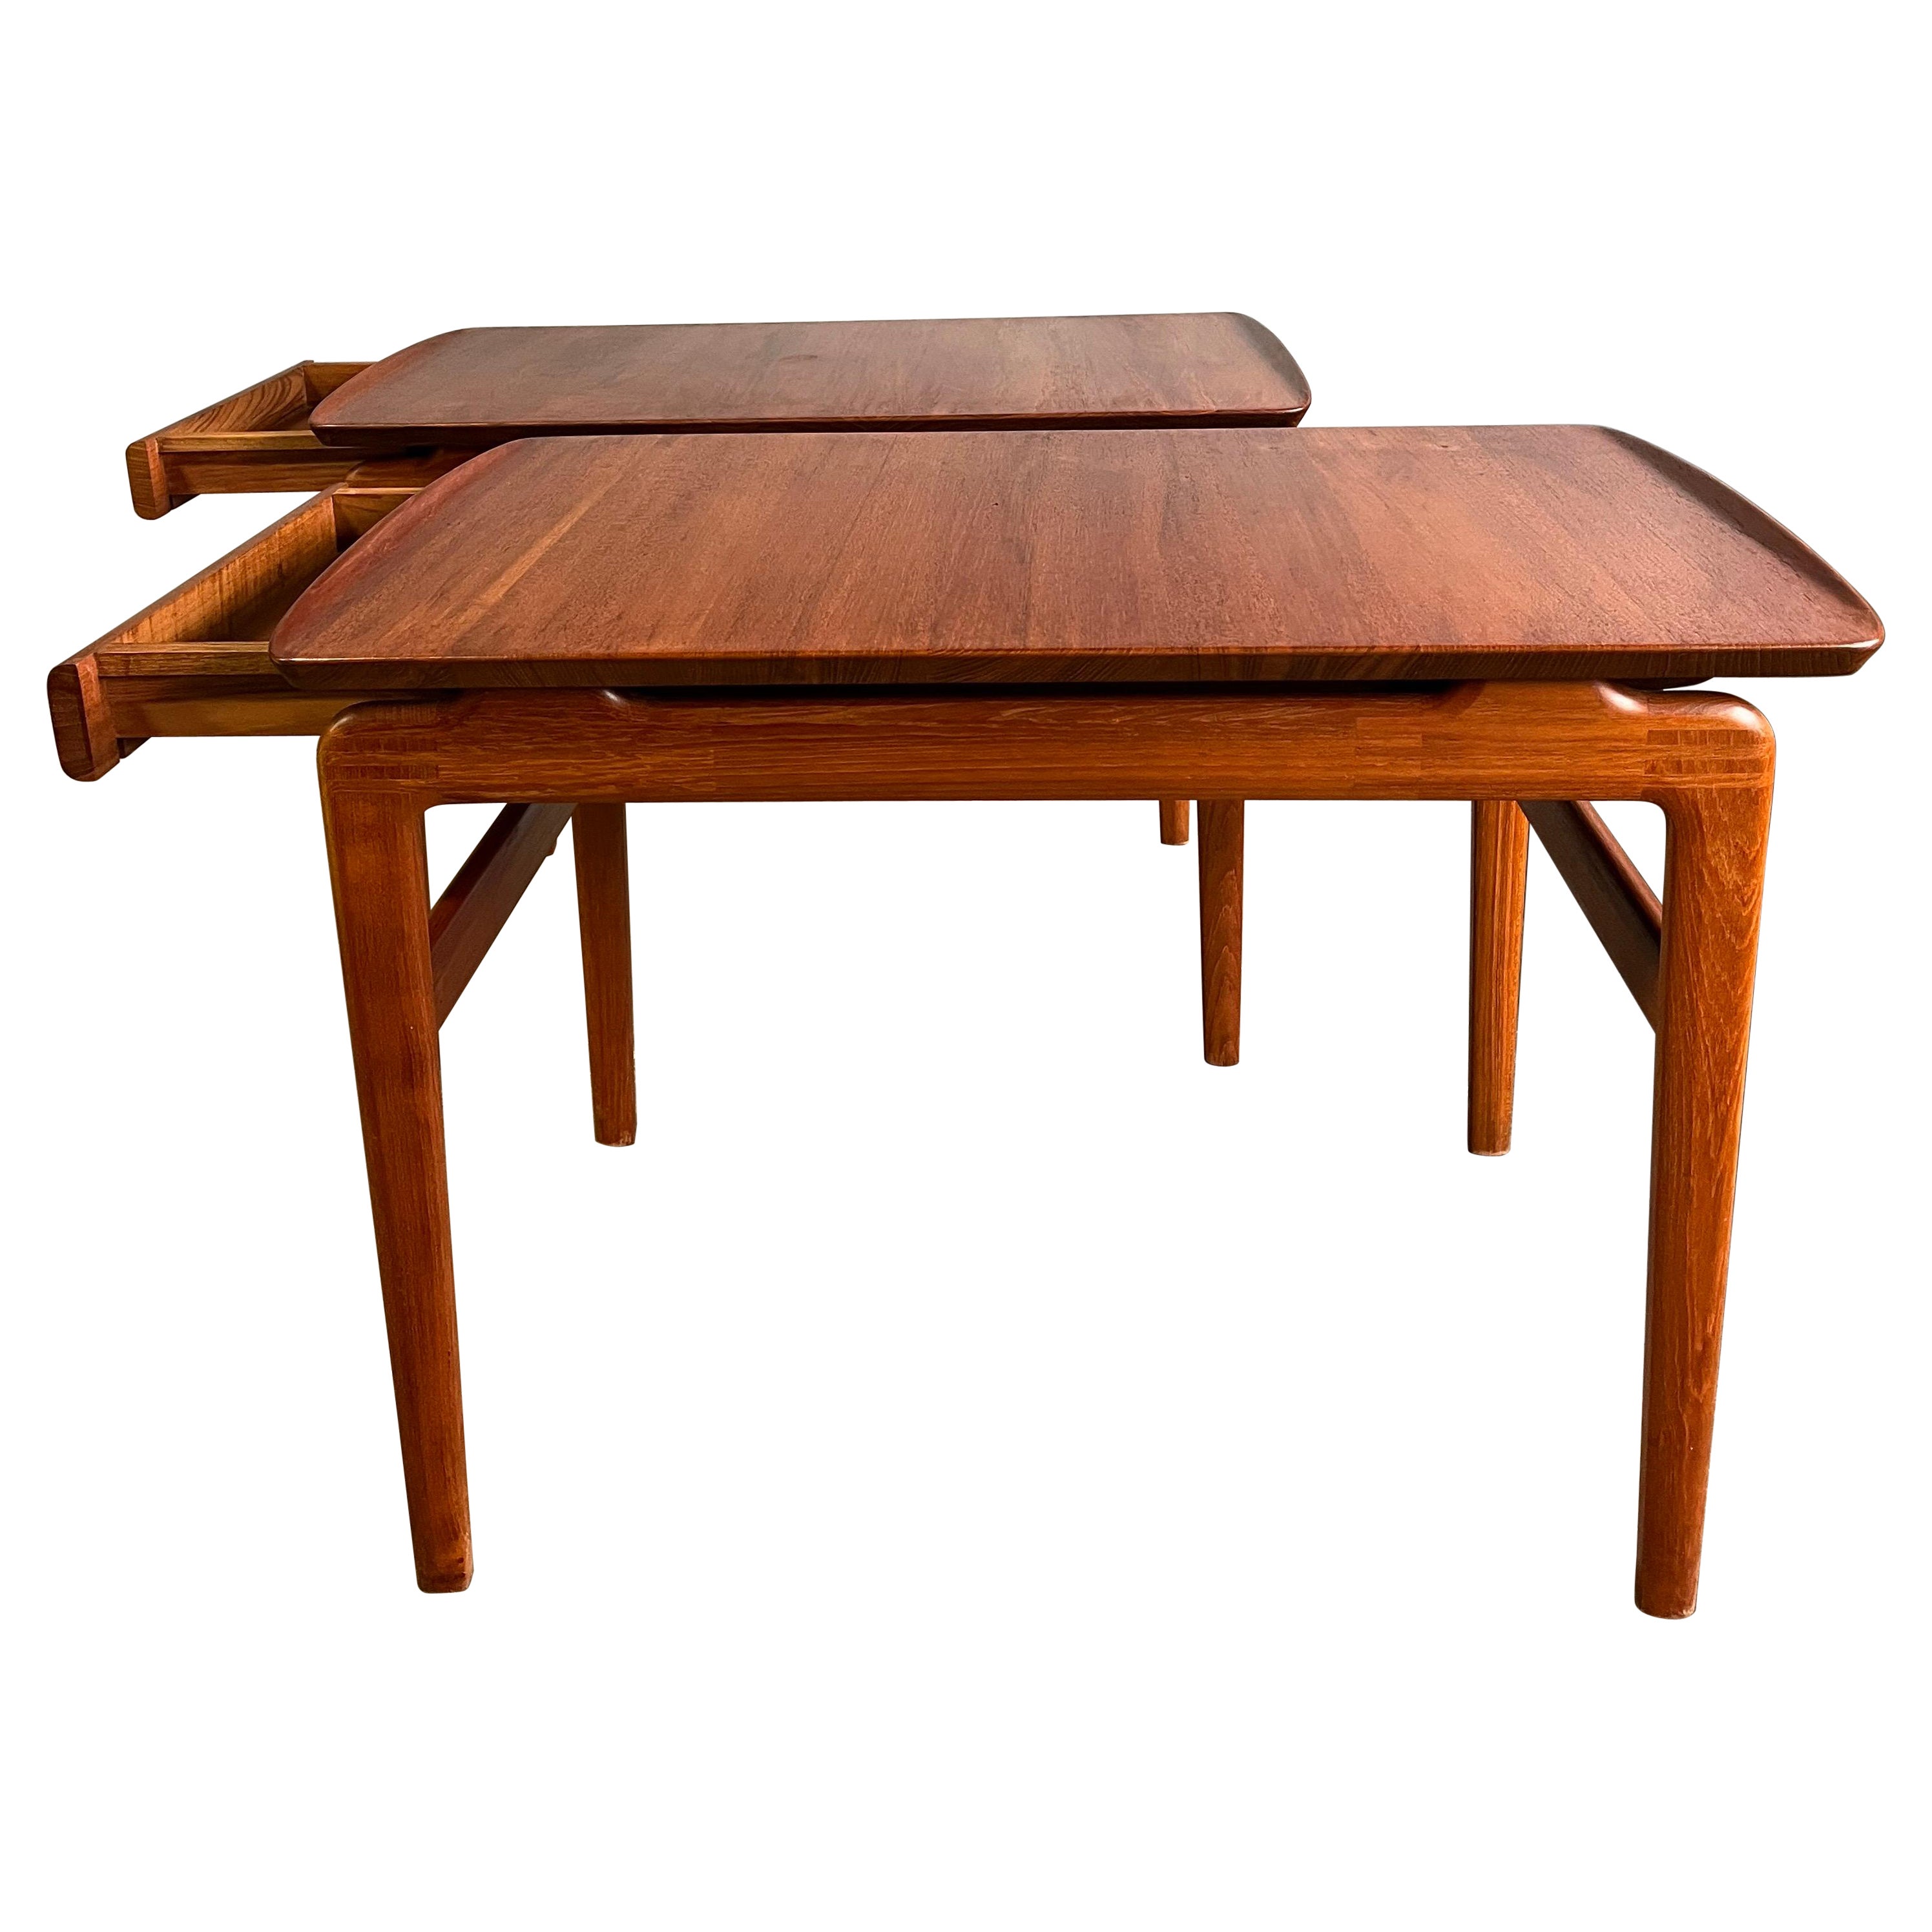 Midcentury Peter Hvidt and Mølgaard-Nelson for France & Søn teak side tables or night stands with drawer. Similar raised edge design as Arne Vodder. Gorgeous design featuring solid wood construction with finger jointed details. Each table has a